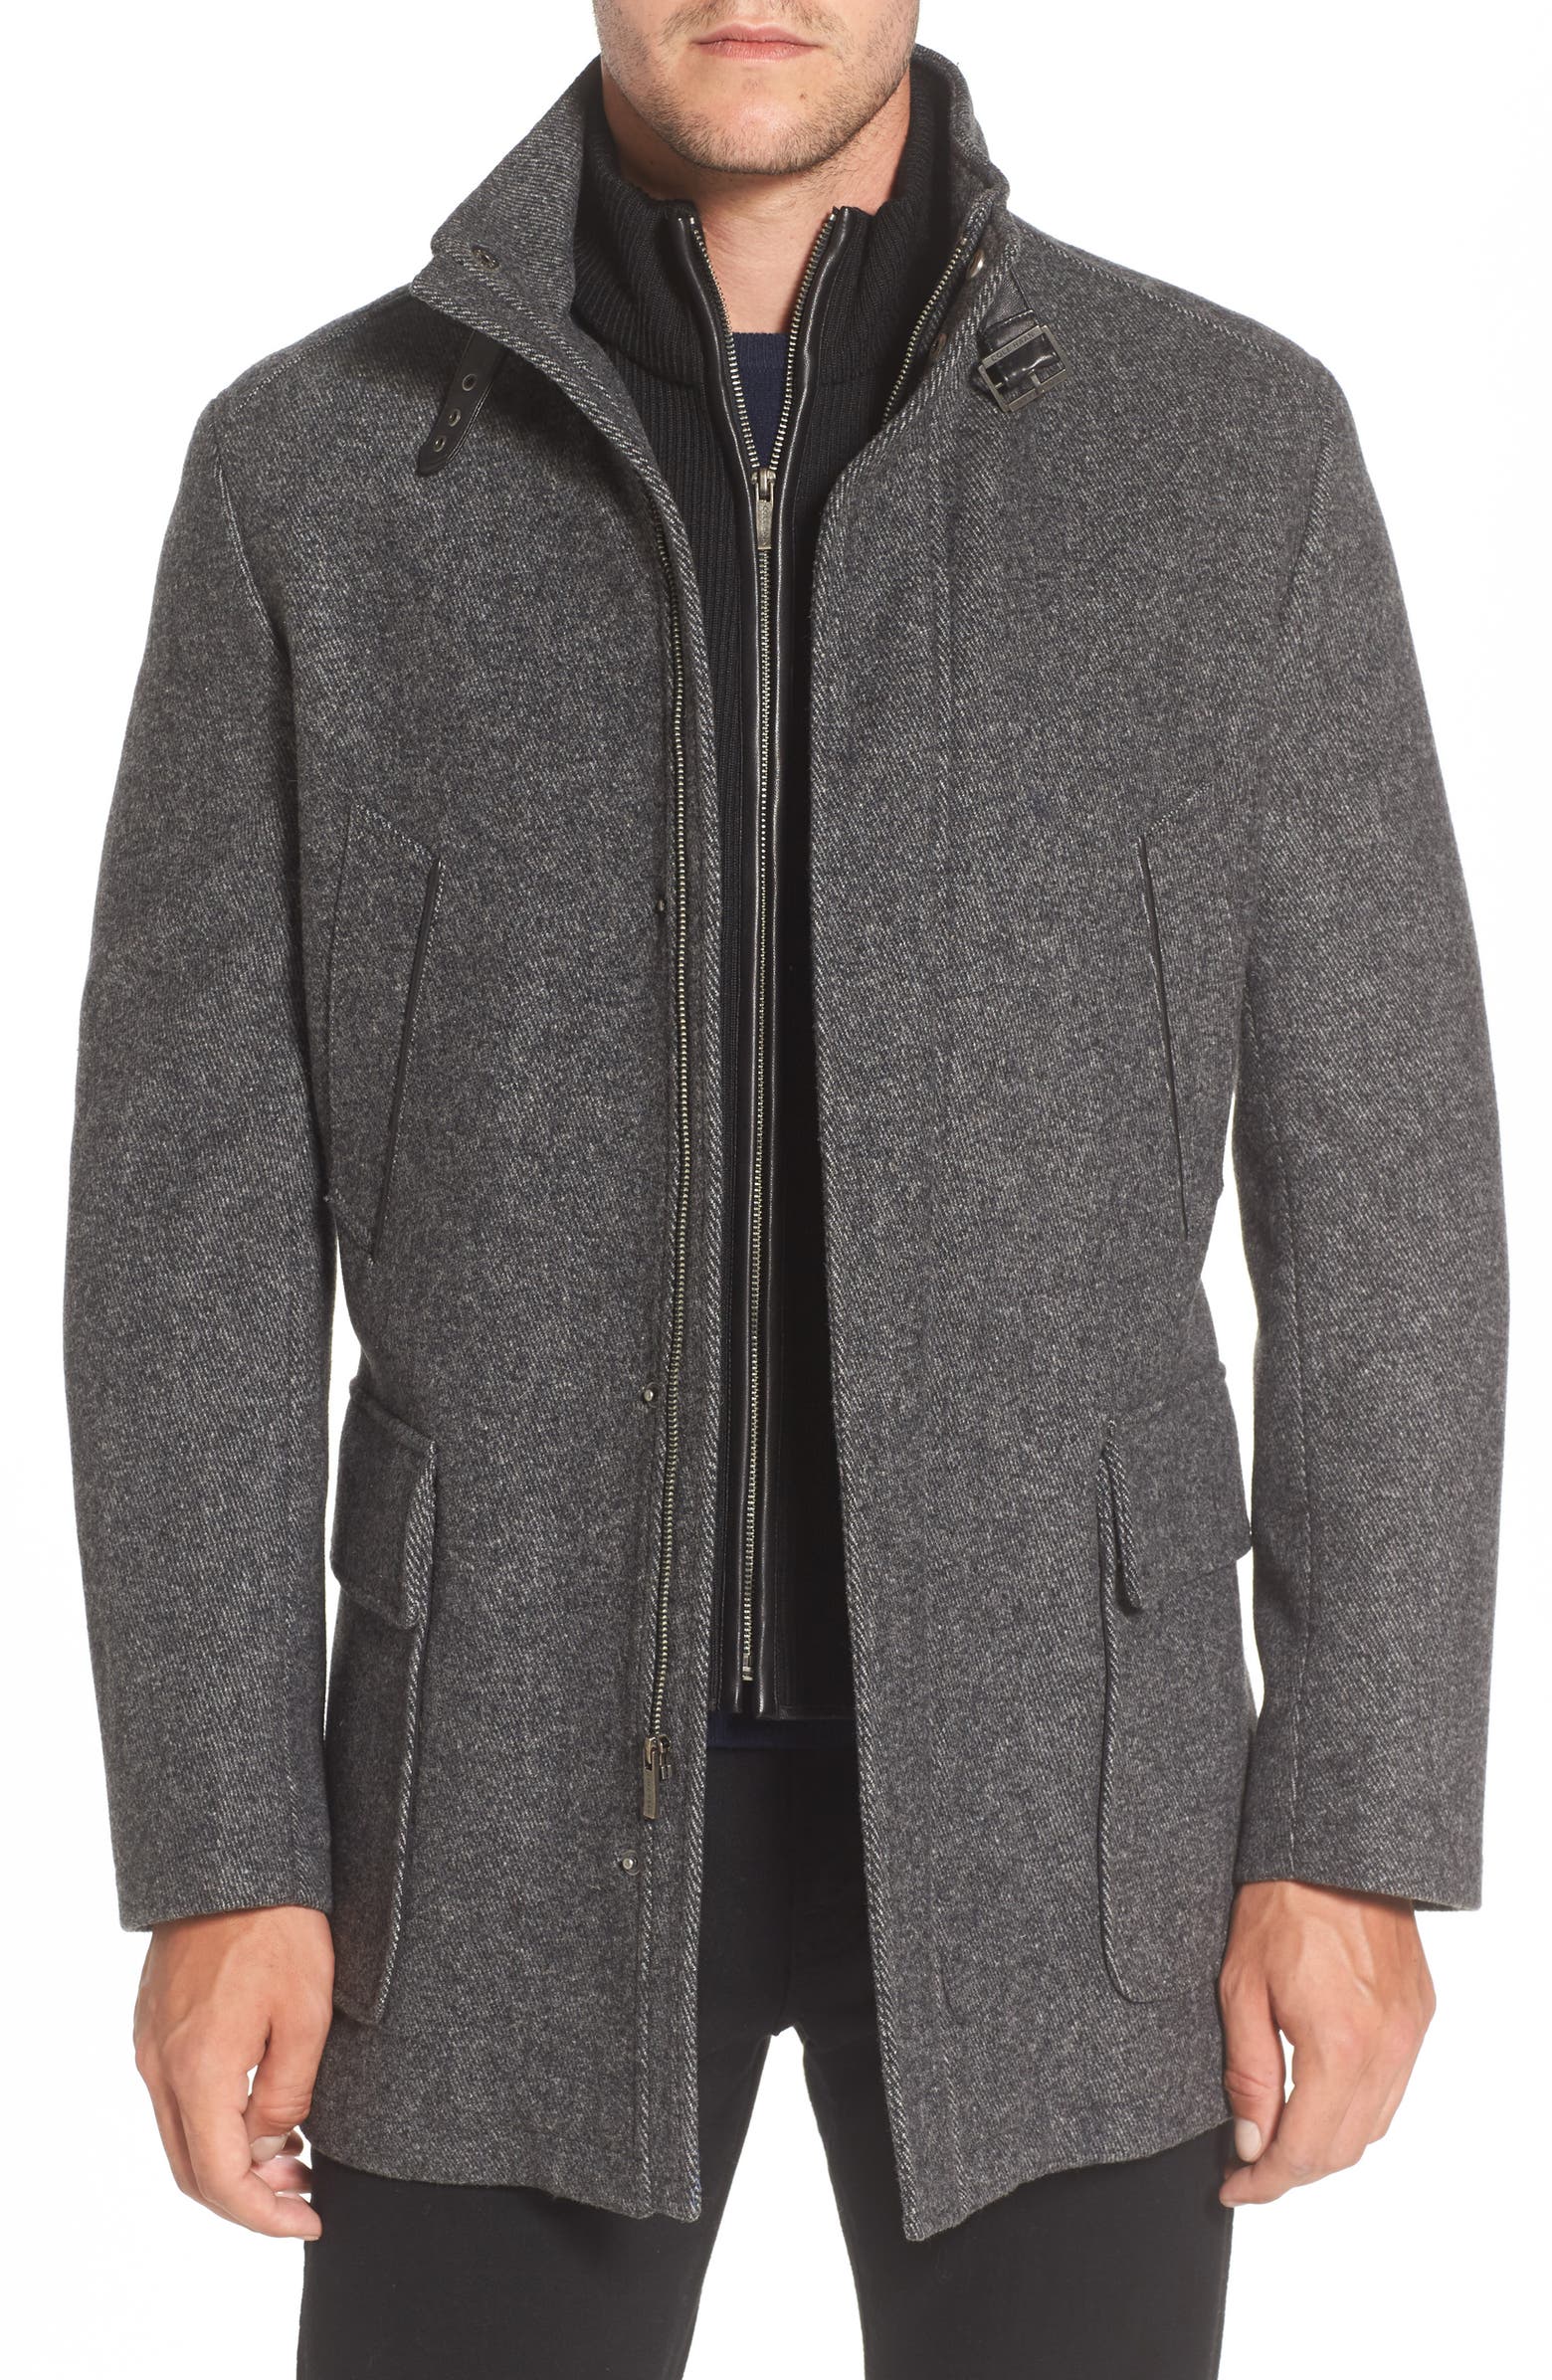 Cole Haan Wool Blend Car Coat with Removable Knit Bib | Nordstrom